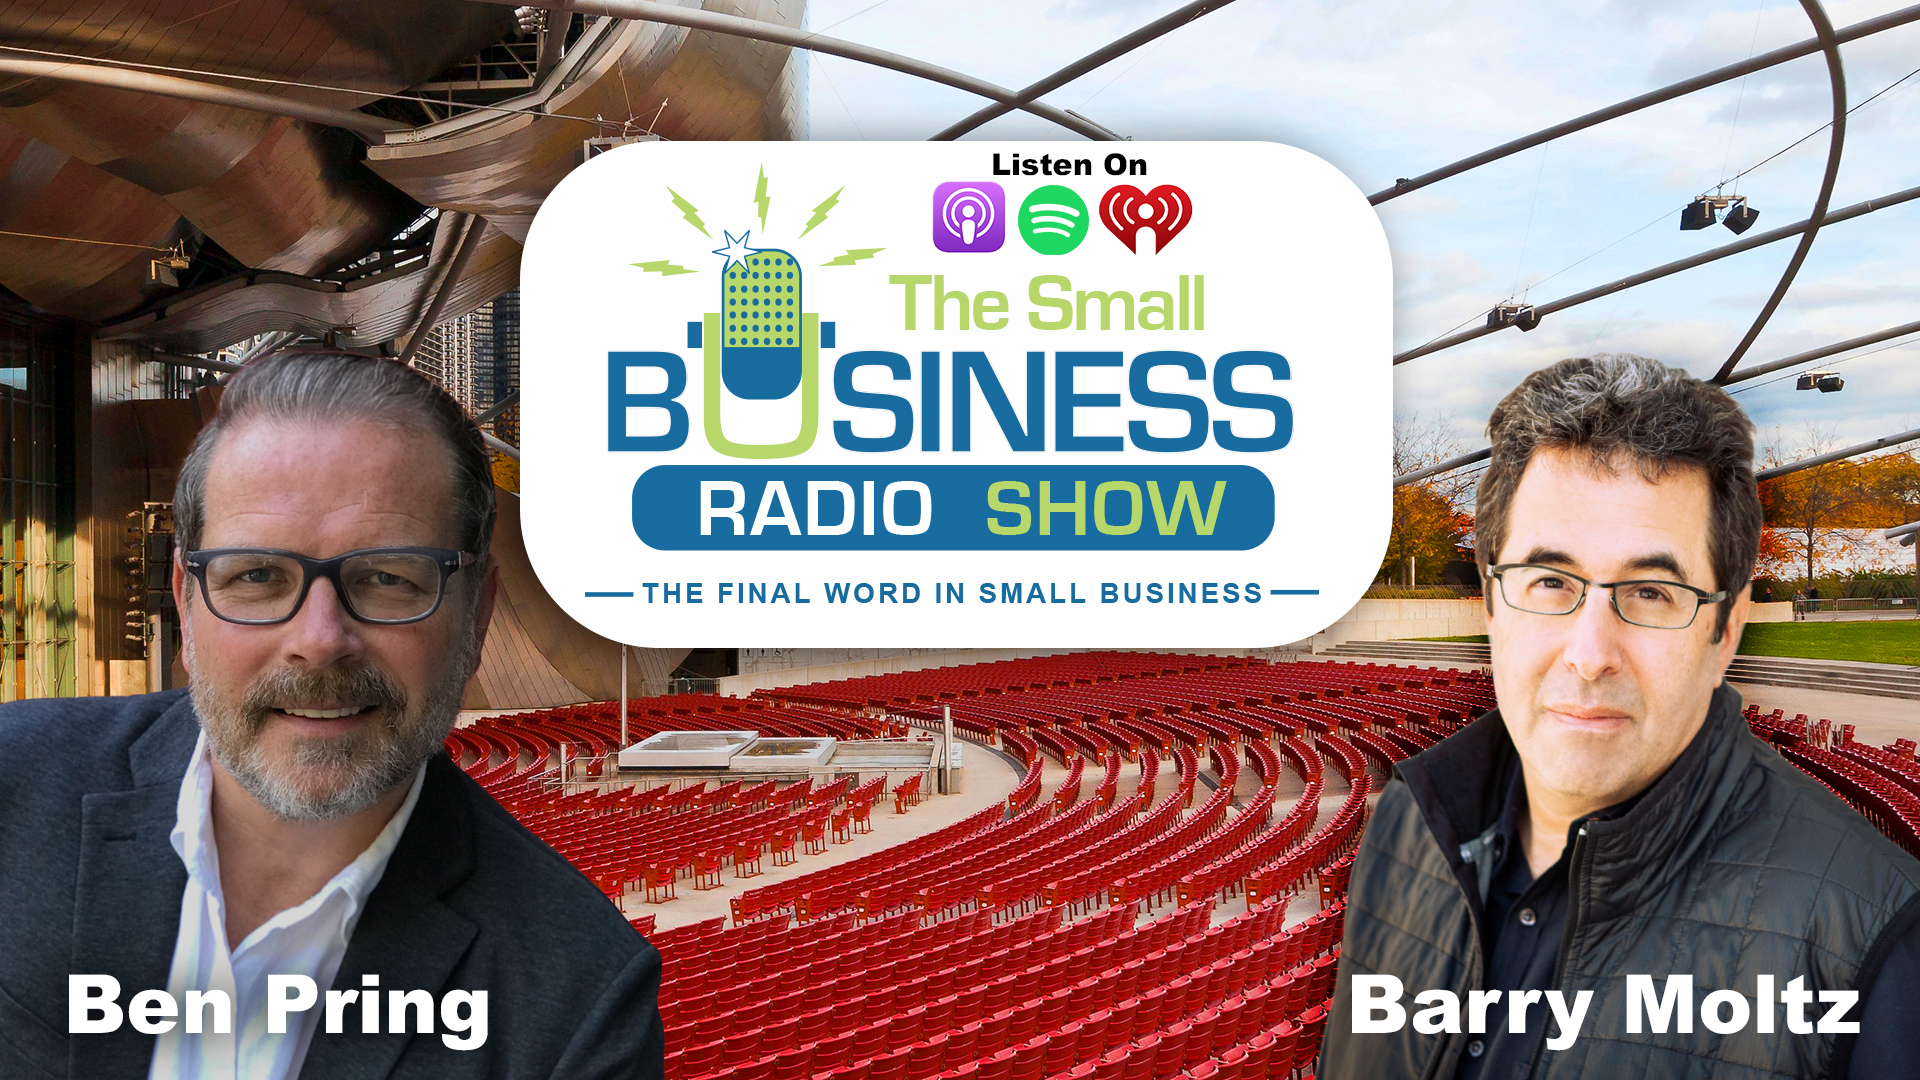 Ben Pring on The Small Business Radio Show